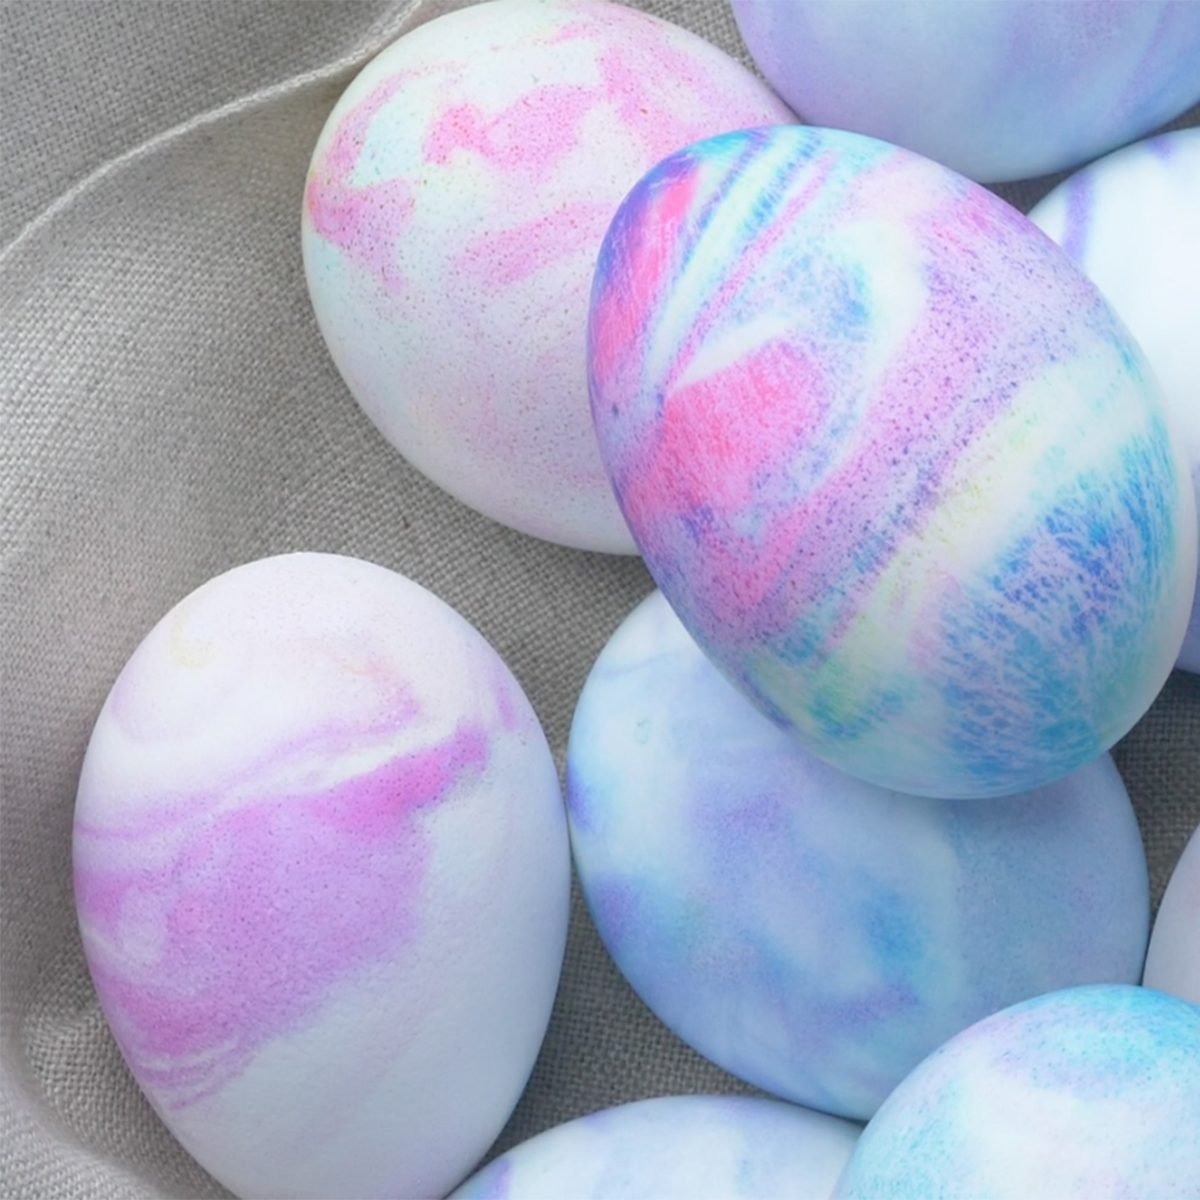 Dying easter eggs in shaving cream and food coloring, easter egg decoration ideas